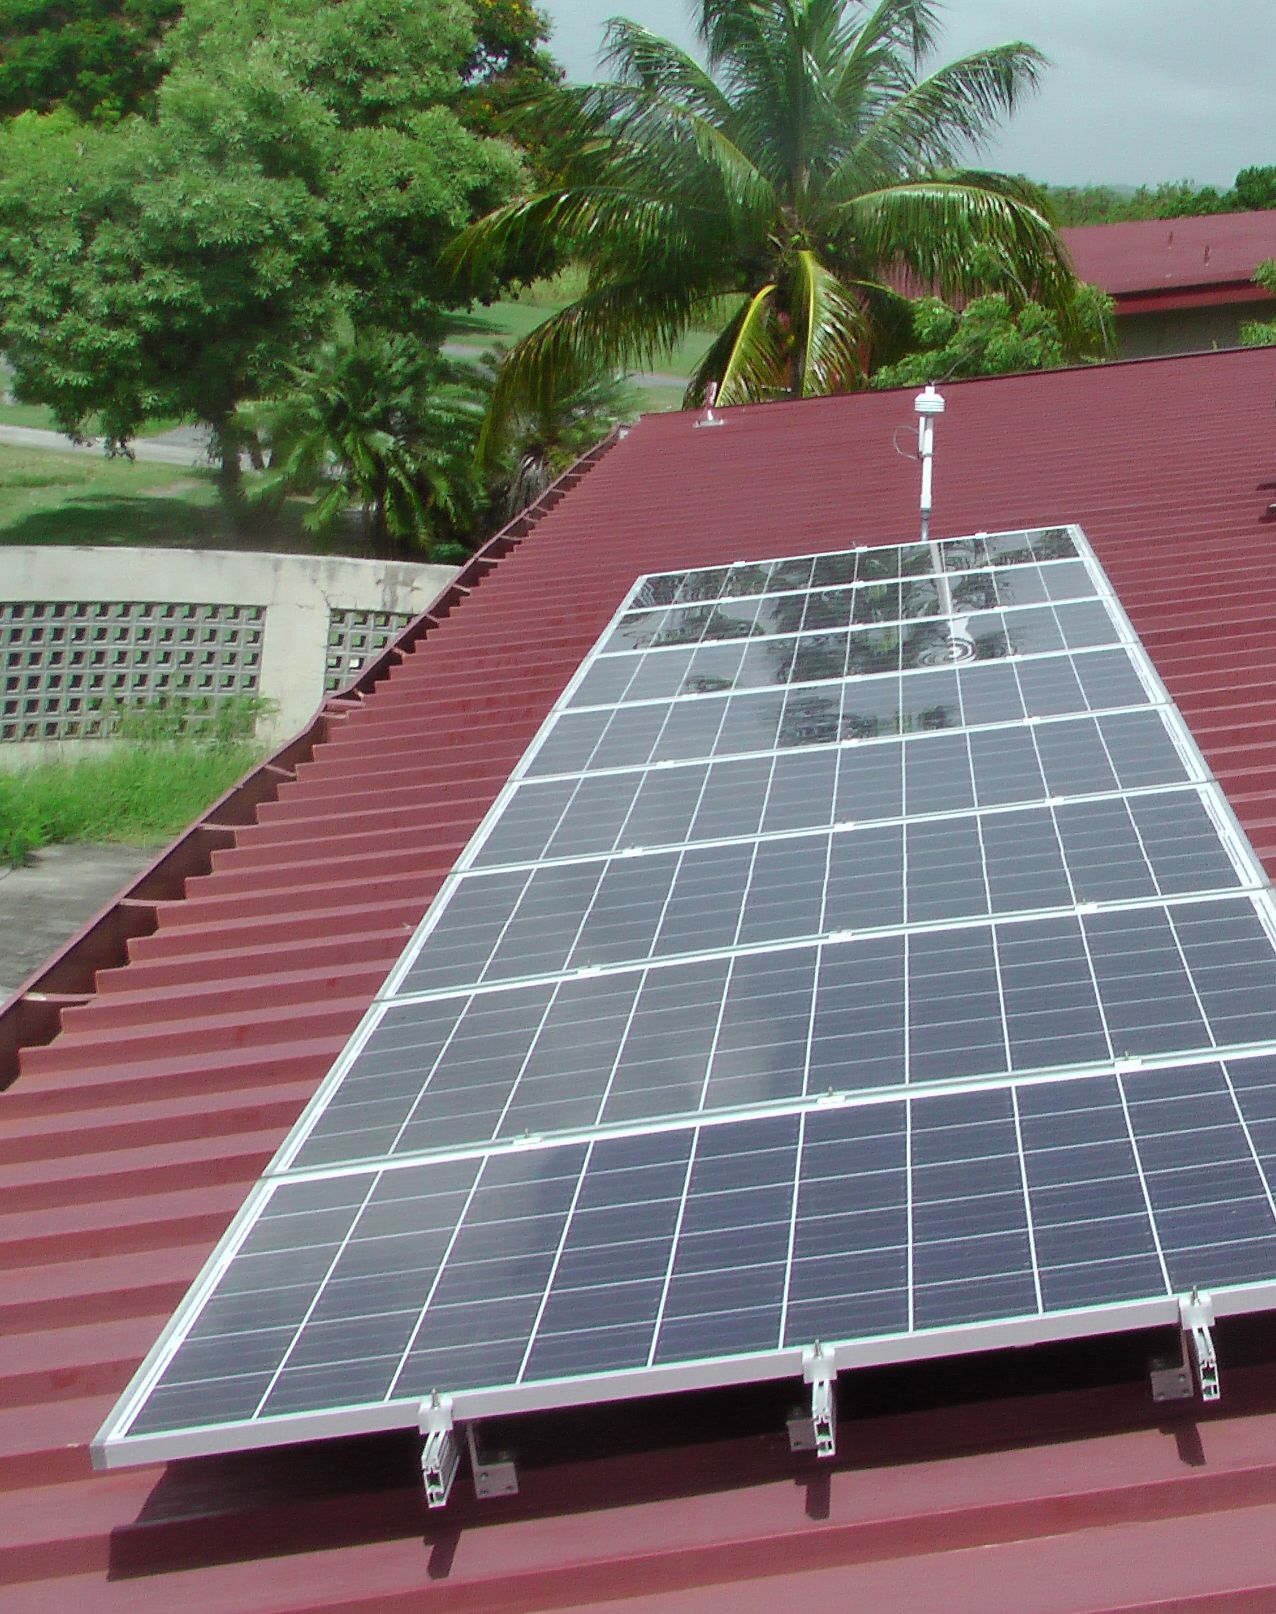 New educational solar panel on St. Croix Educational Complex roof (Photo courtesy of V.I. Energy Office).